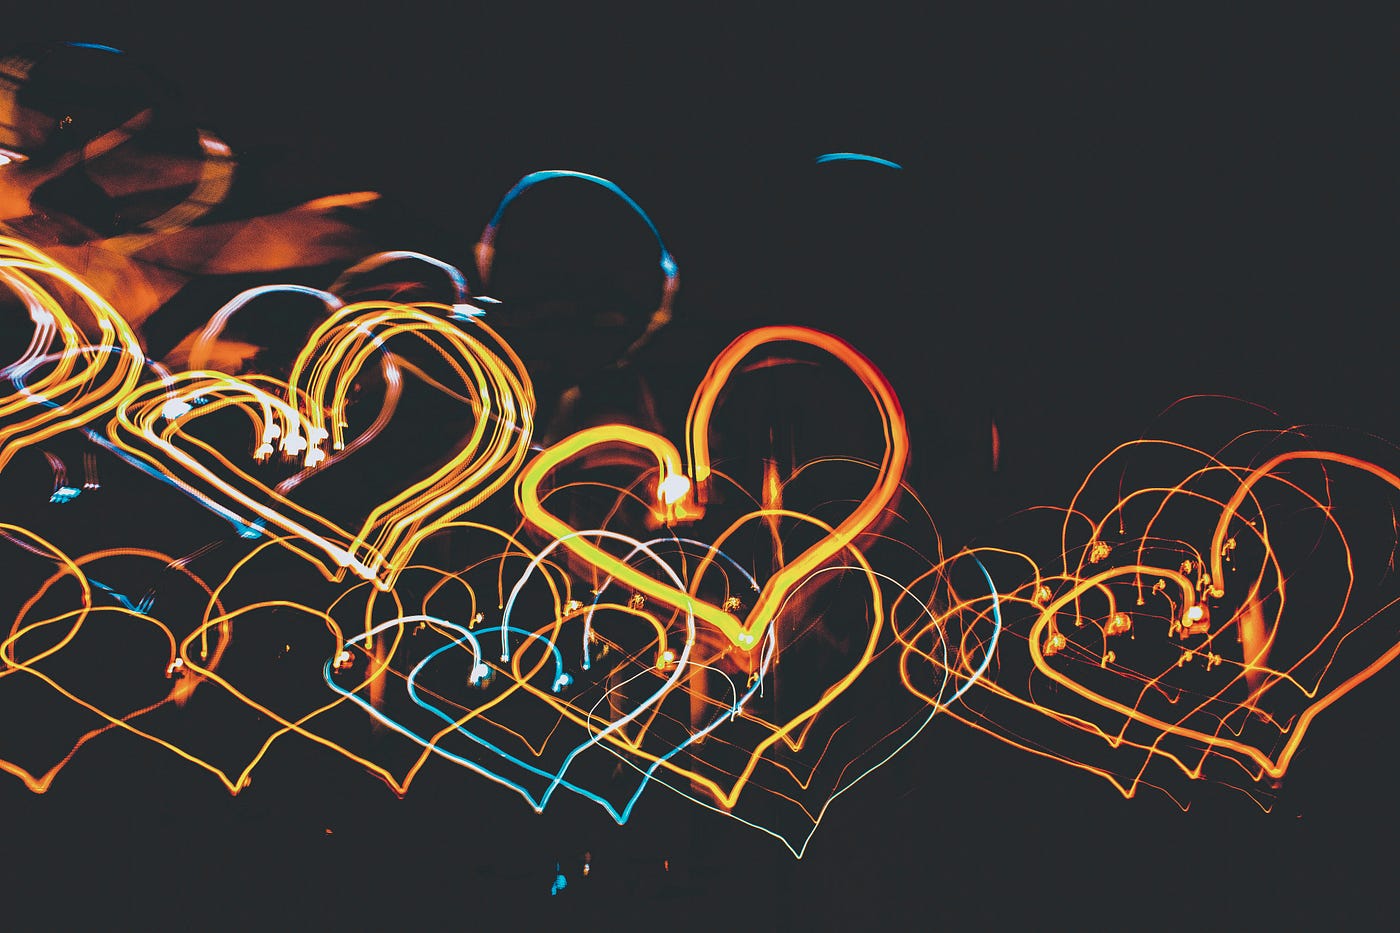 Photo of neon lit hearts in different colors against a black background by Nothing Ahead on Pexels.